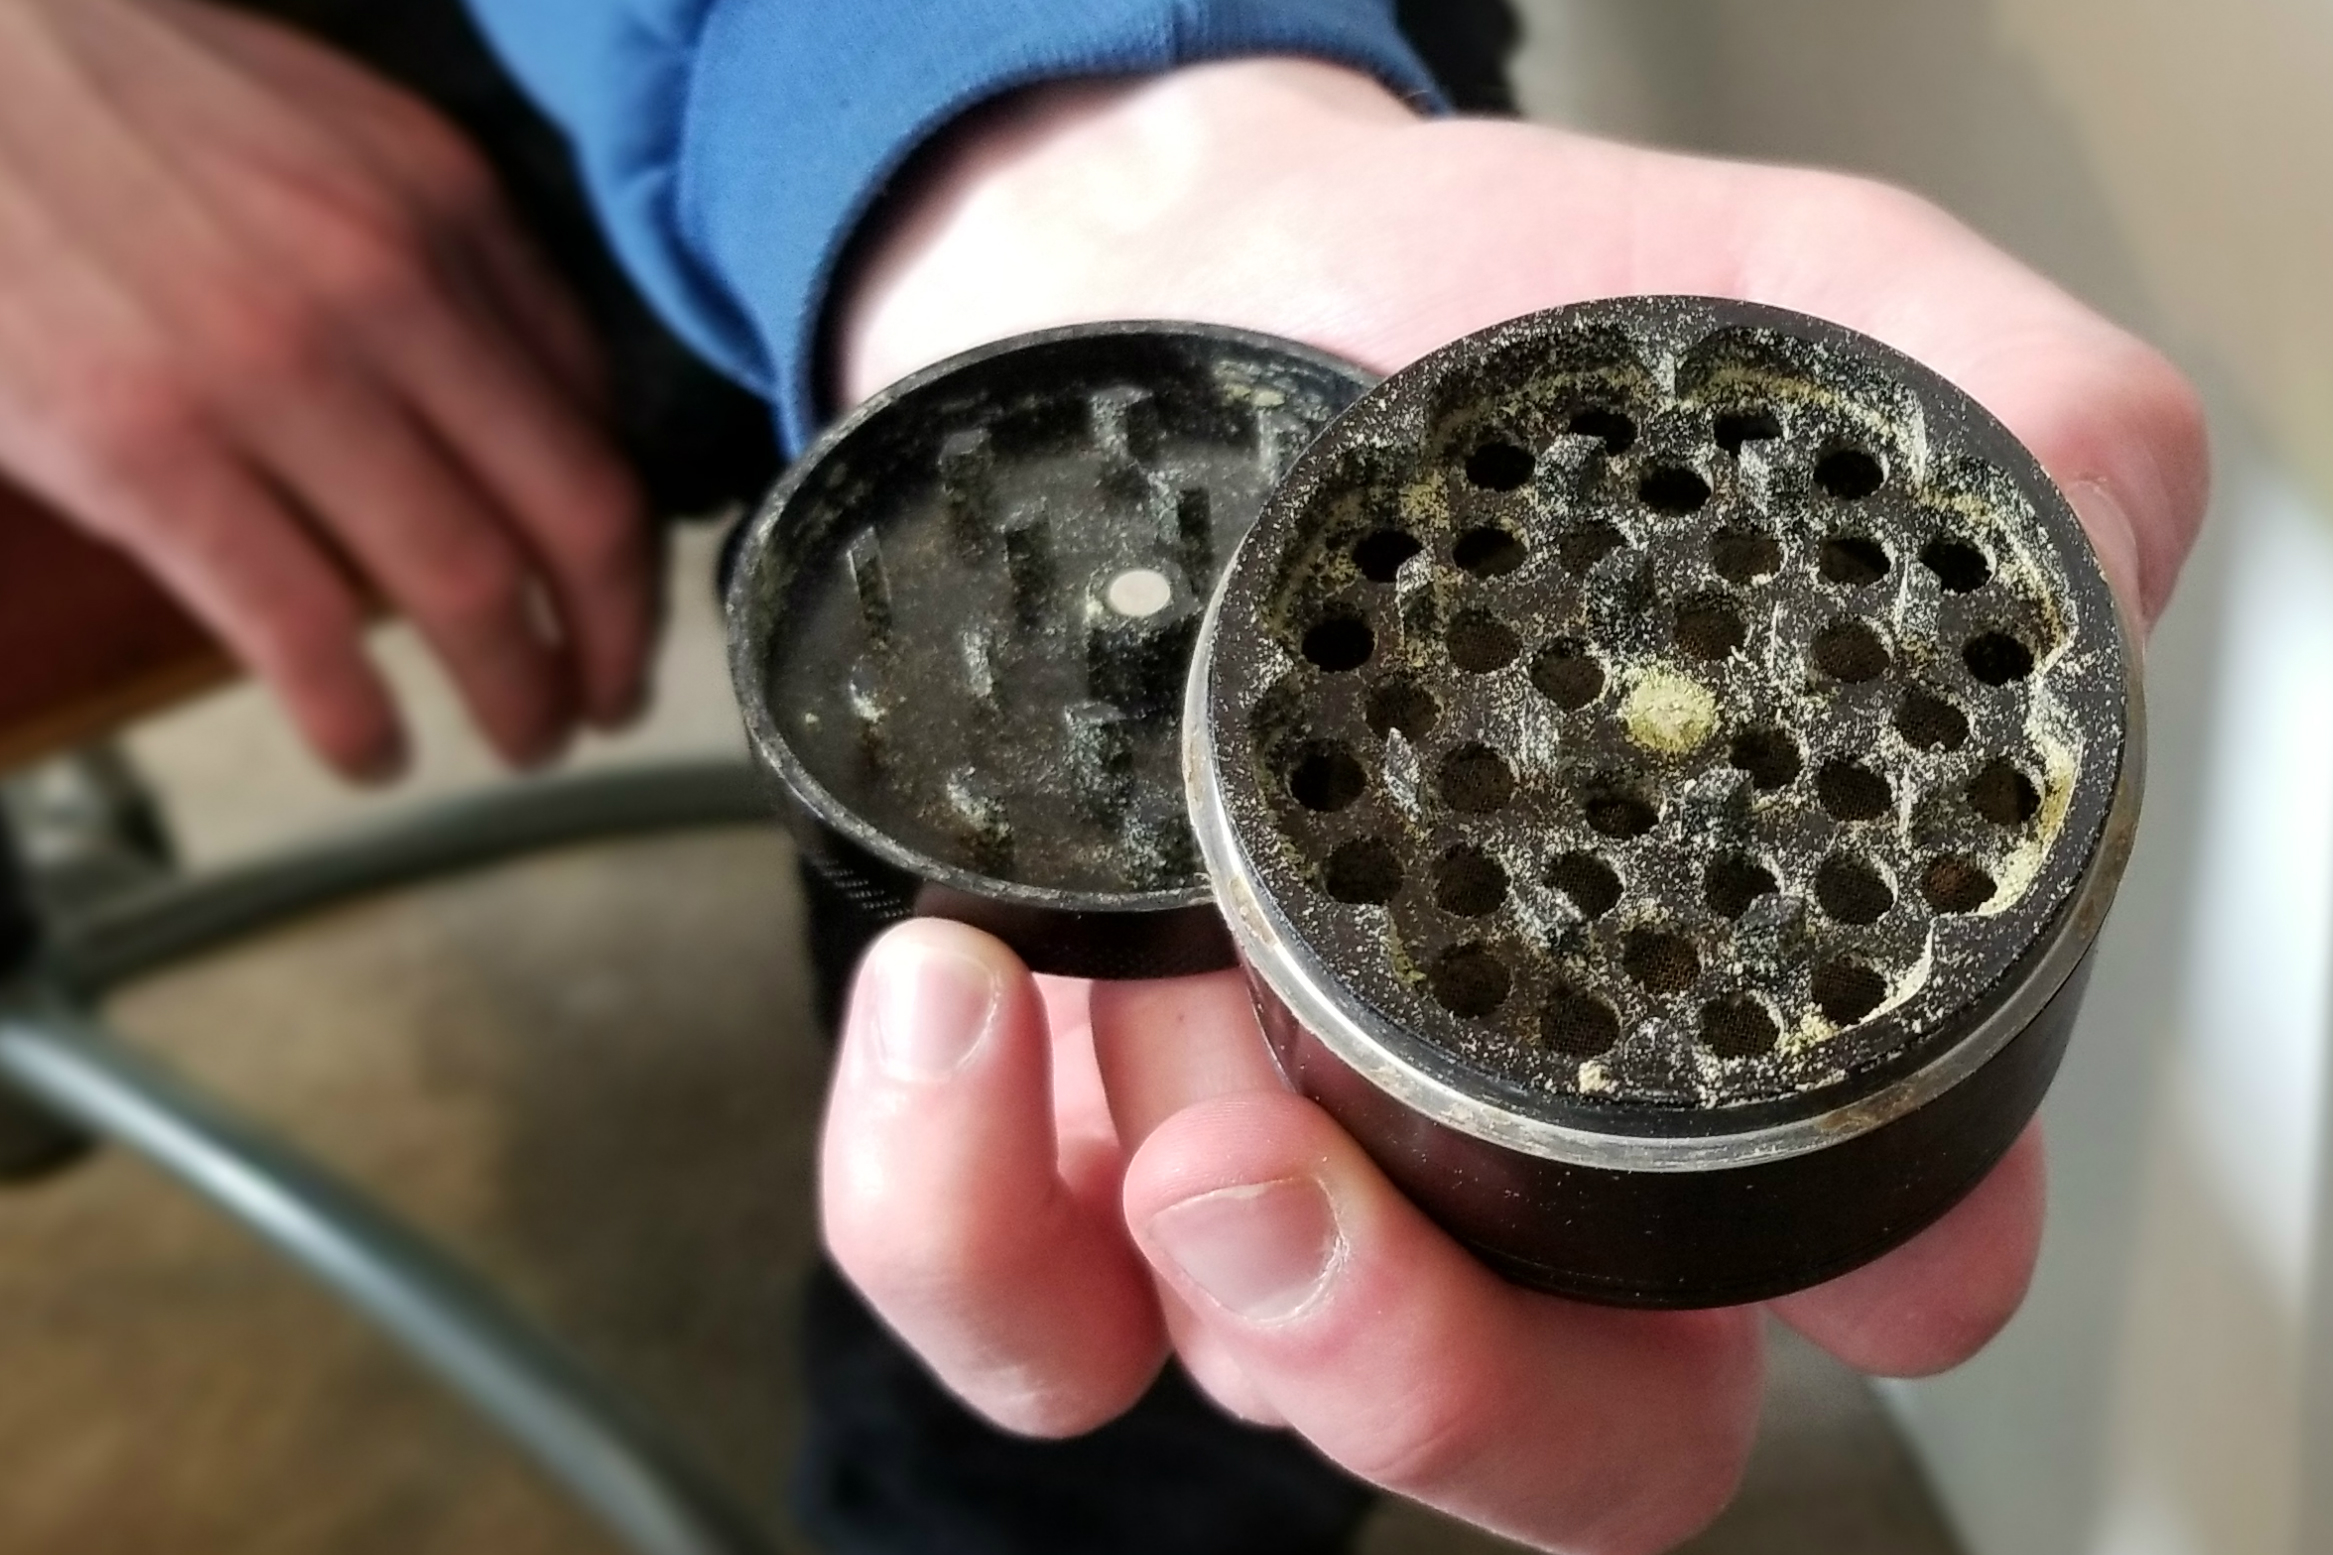 Should You Clean Your Weed Grinder?